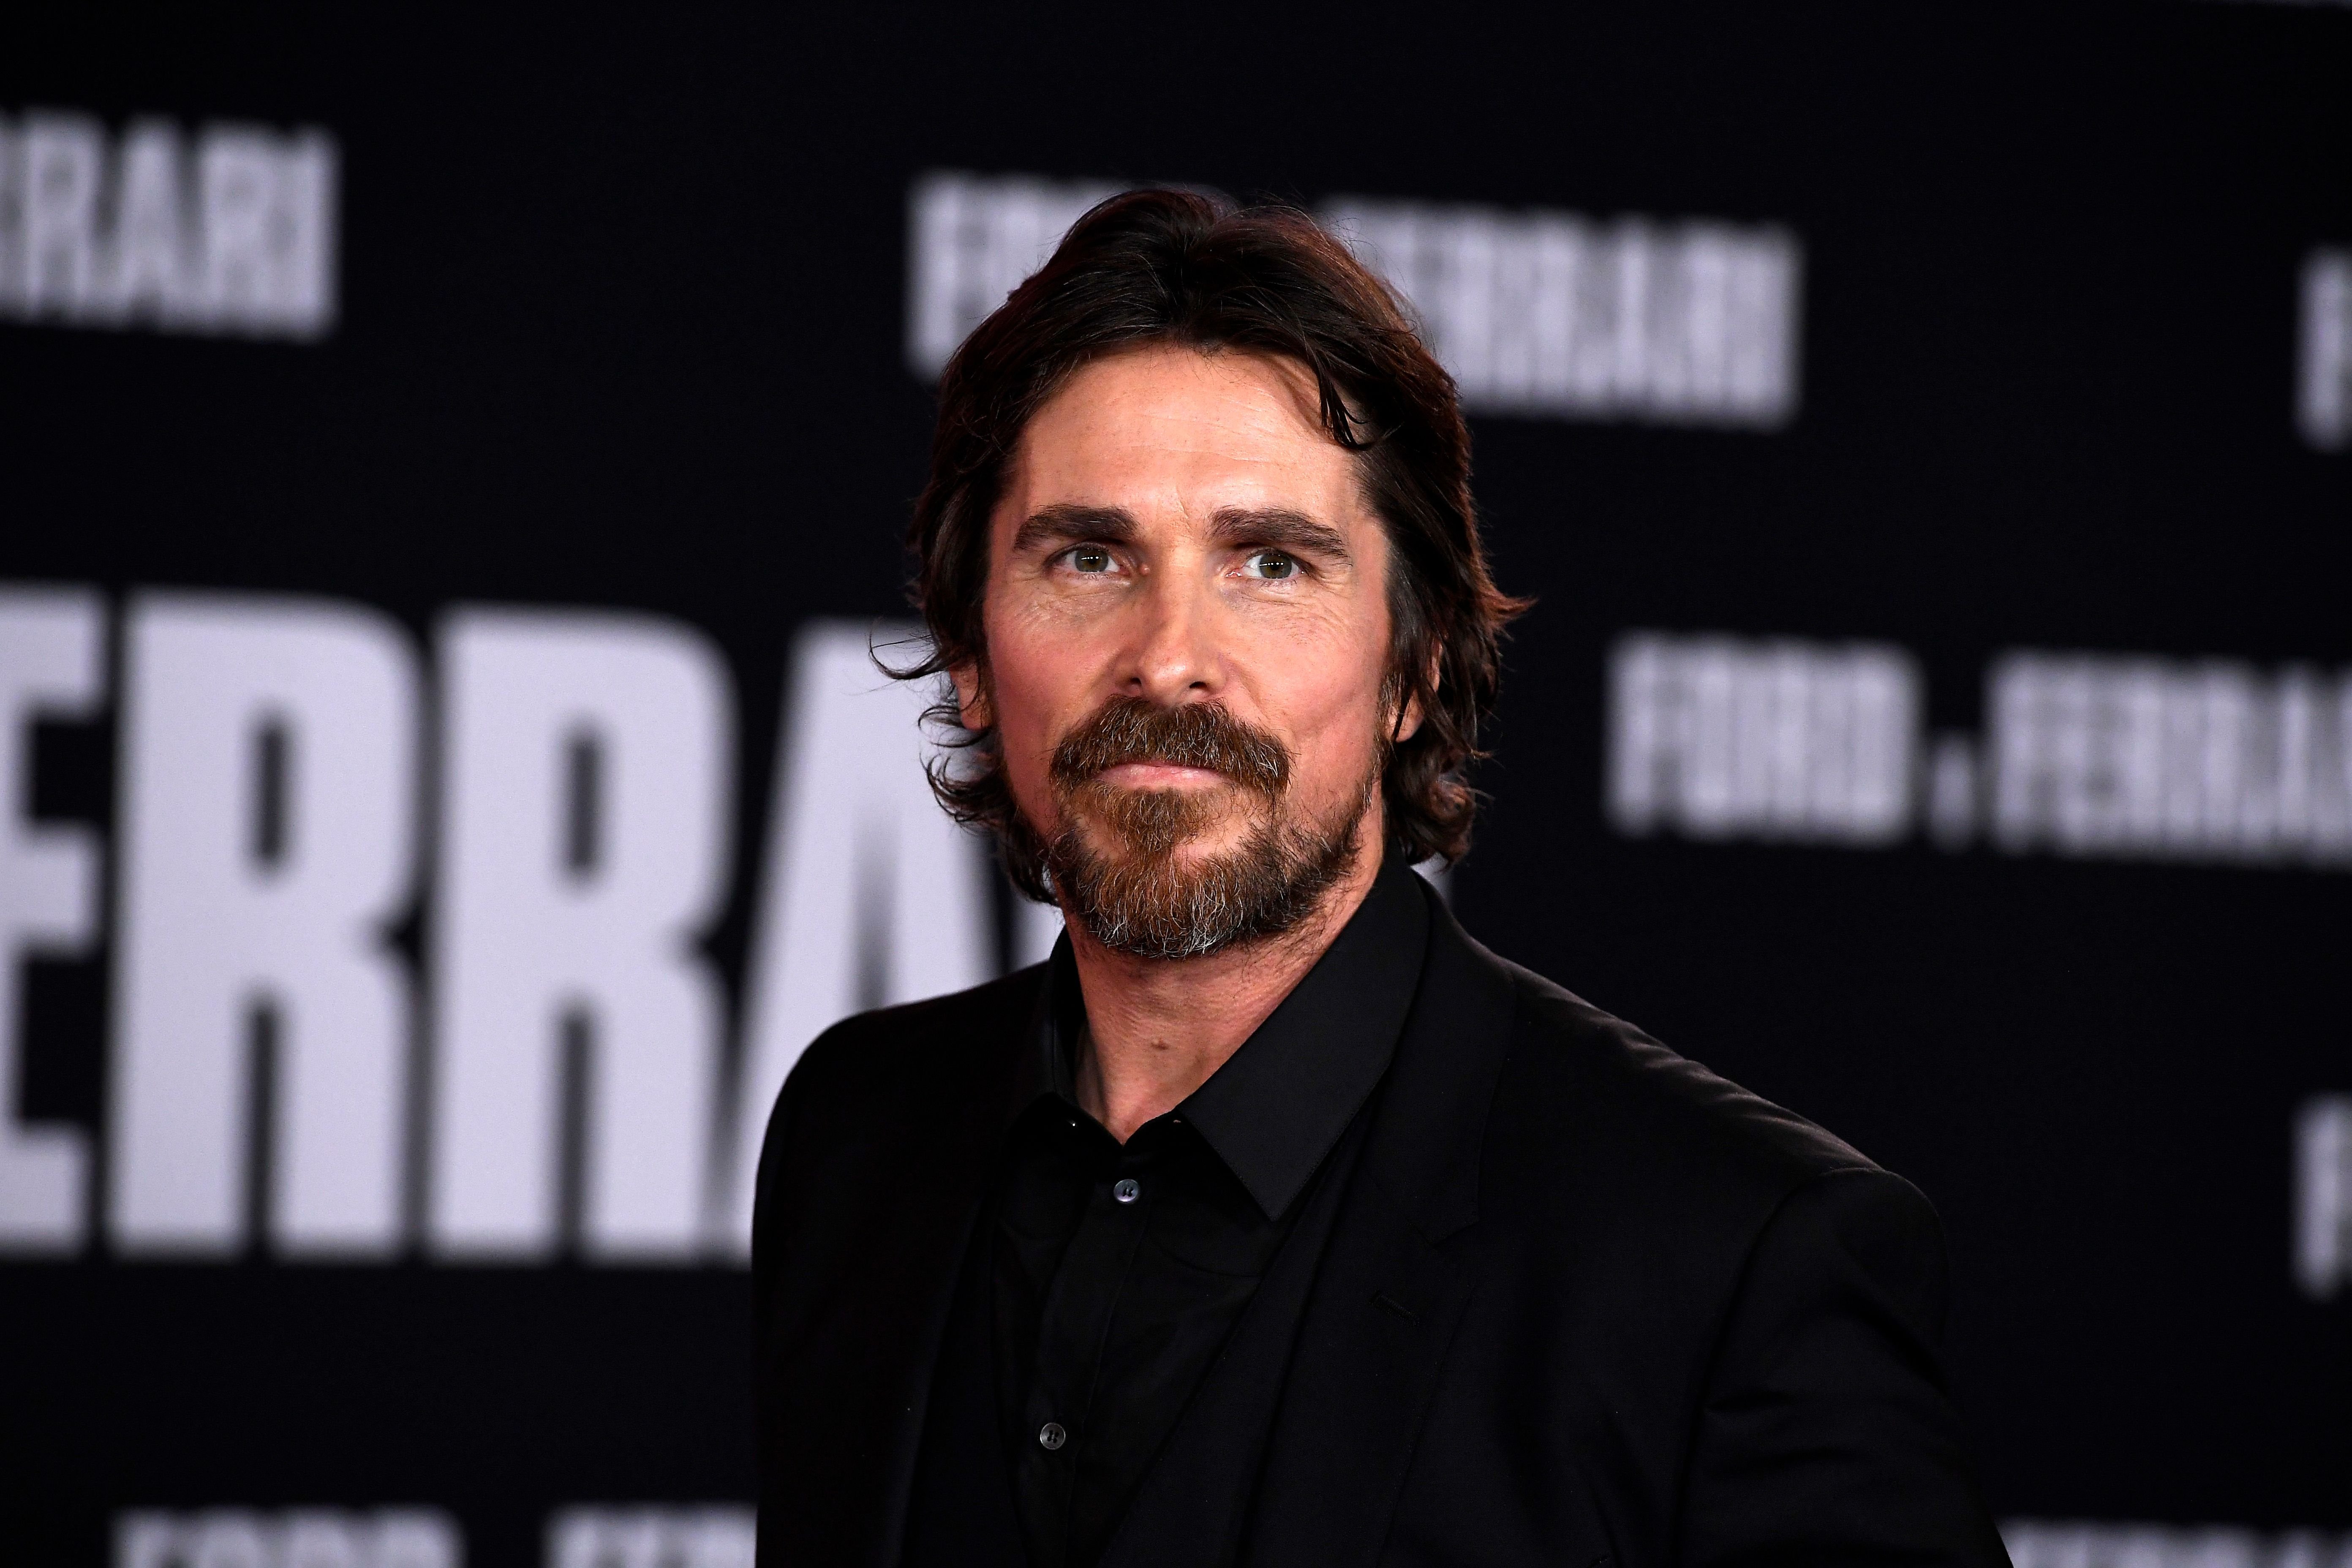 Christian Bale during the premiere Of FOX's "Ford V Ferrari" at TCL Chinese Theatre on November 04, 2019 in Hollywood, California. | Source: Getty Images